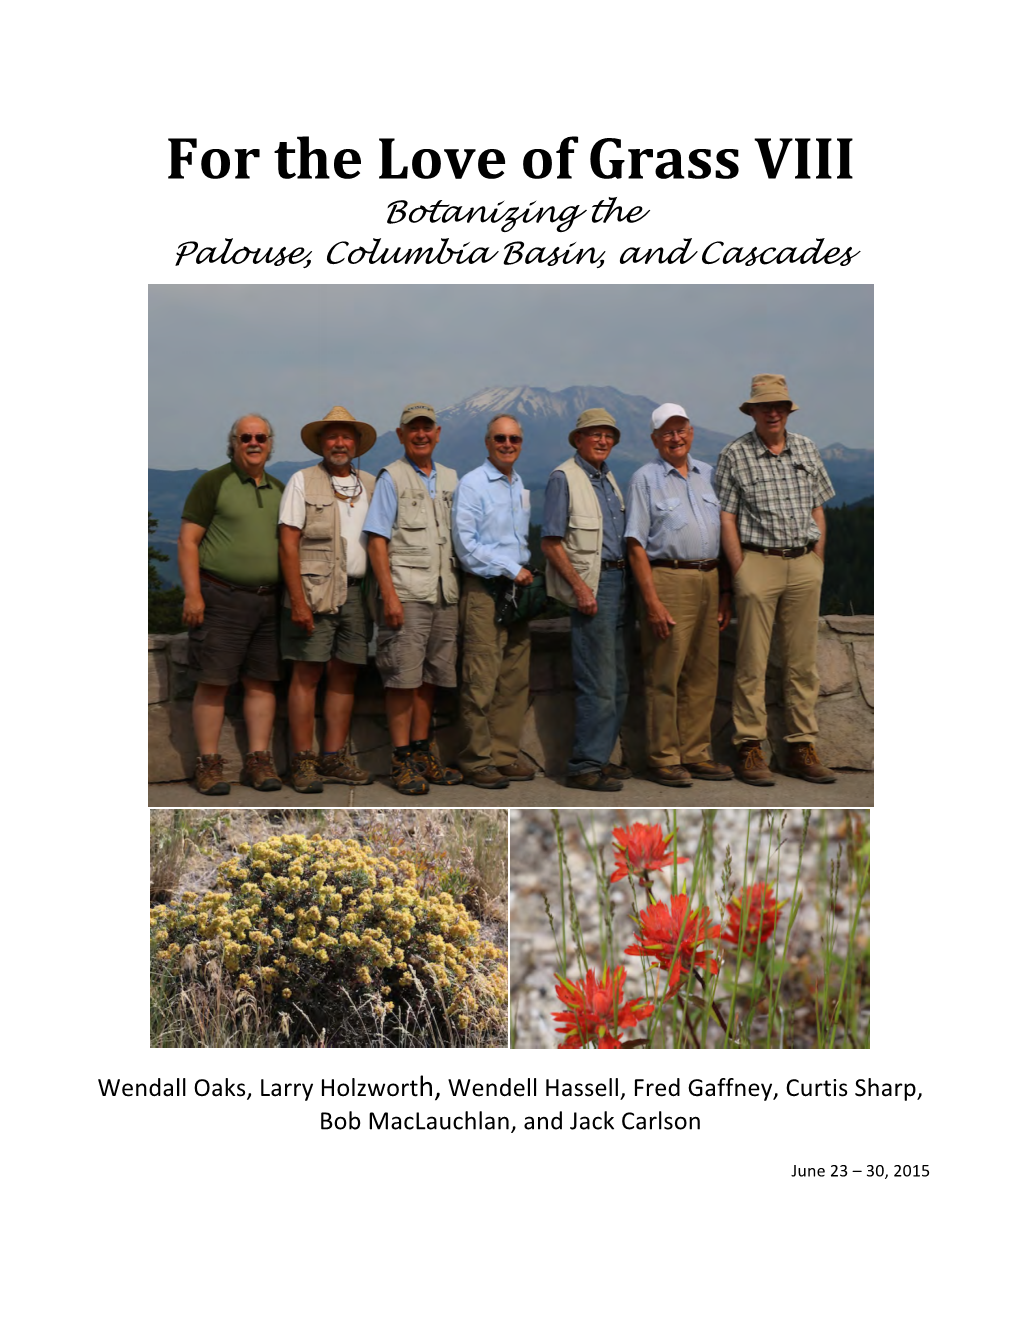 For the Love of Grass VIII 2015